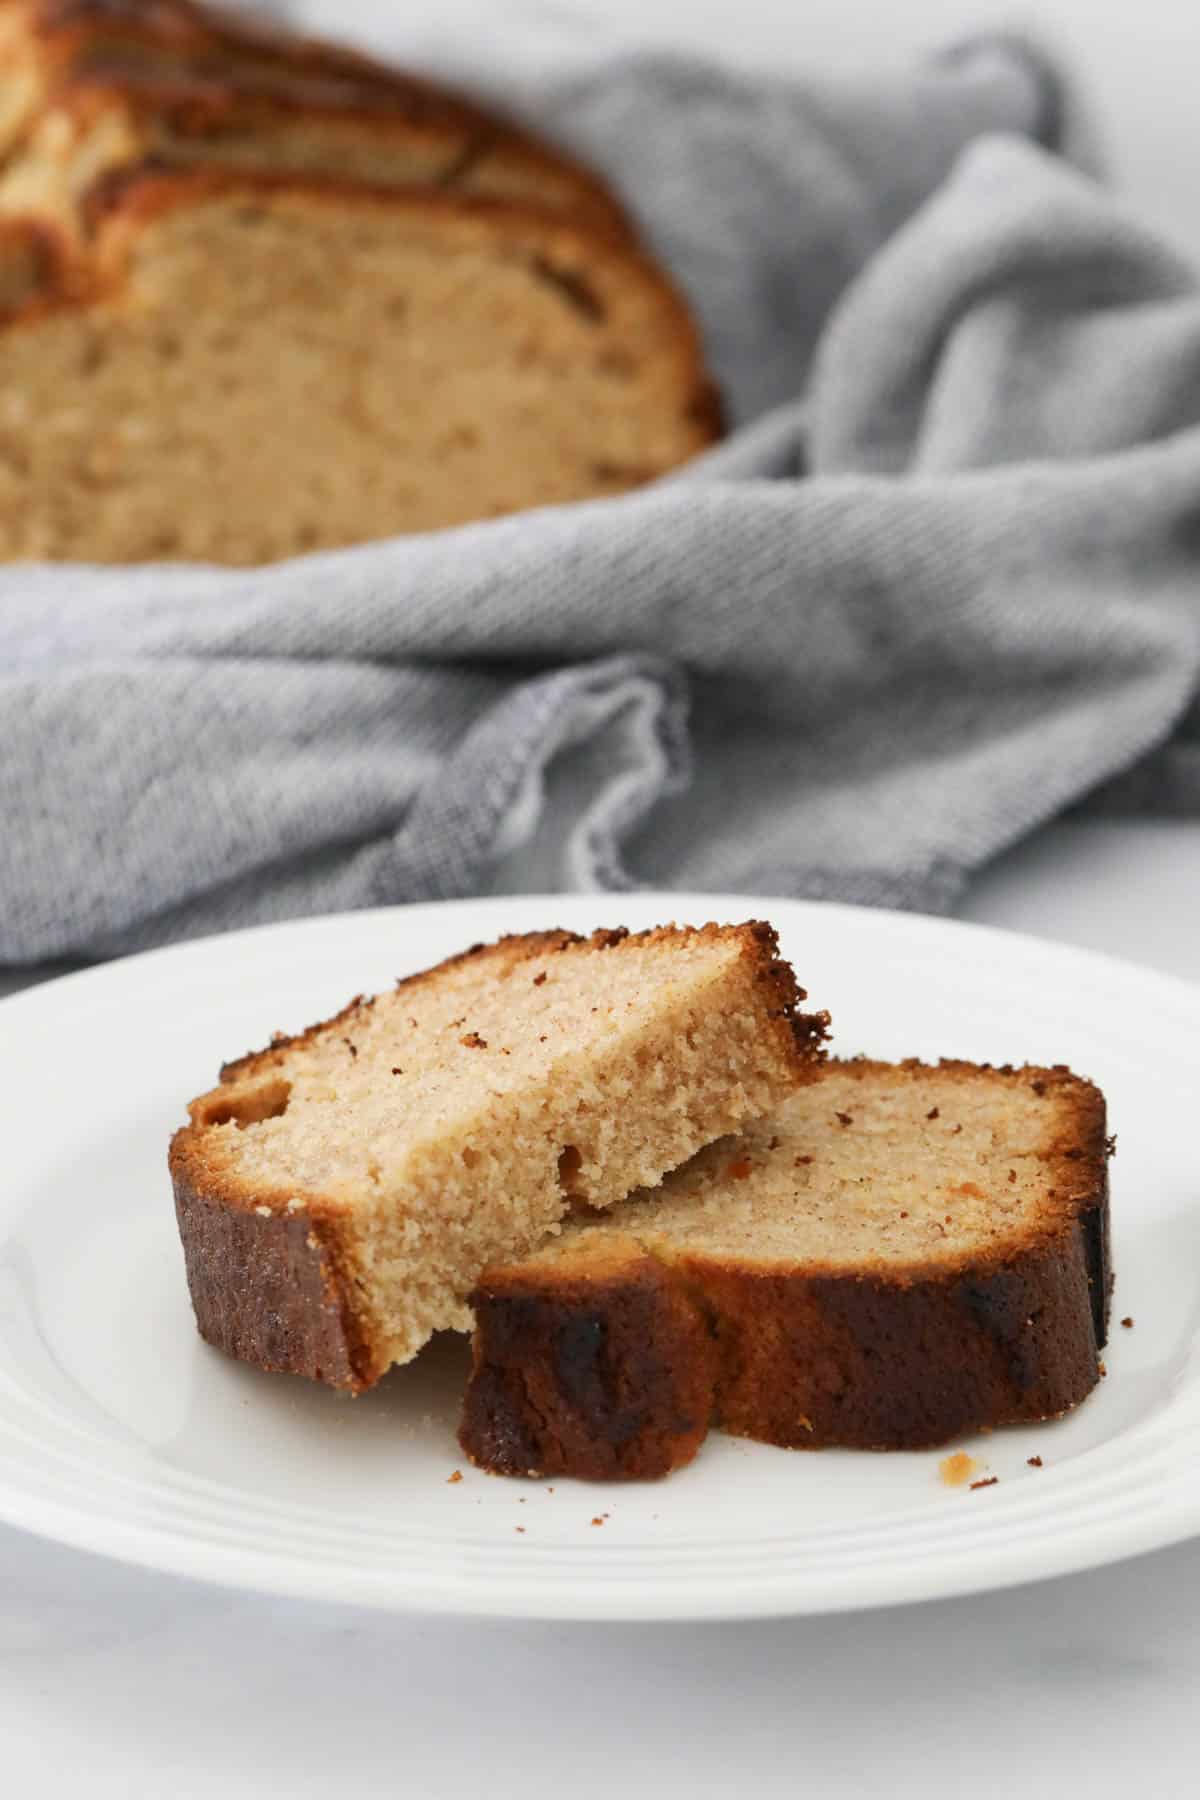 Two slices of banana bread on a plate.